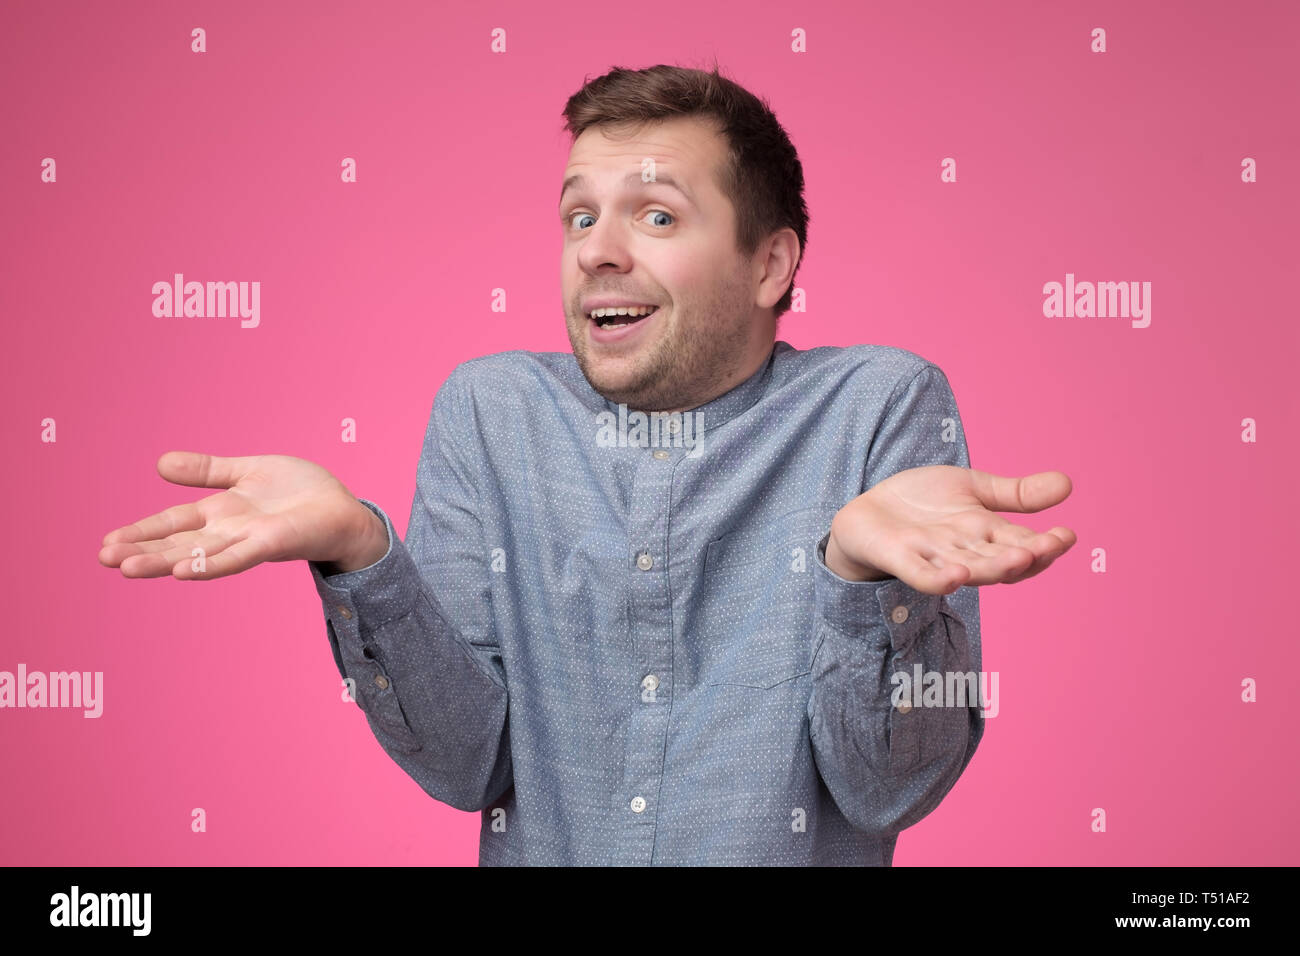 guy showing I have no idea gesture, shrugging shoulders and raising hands Stock Photo